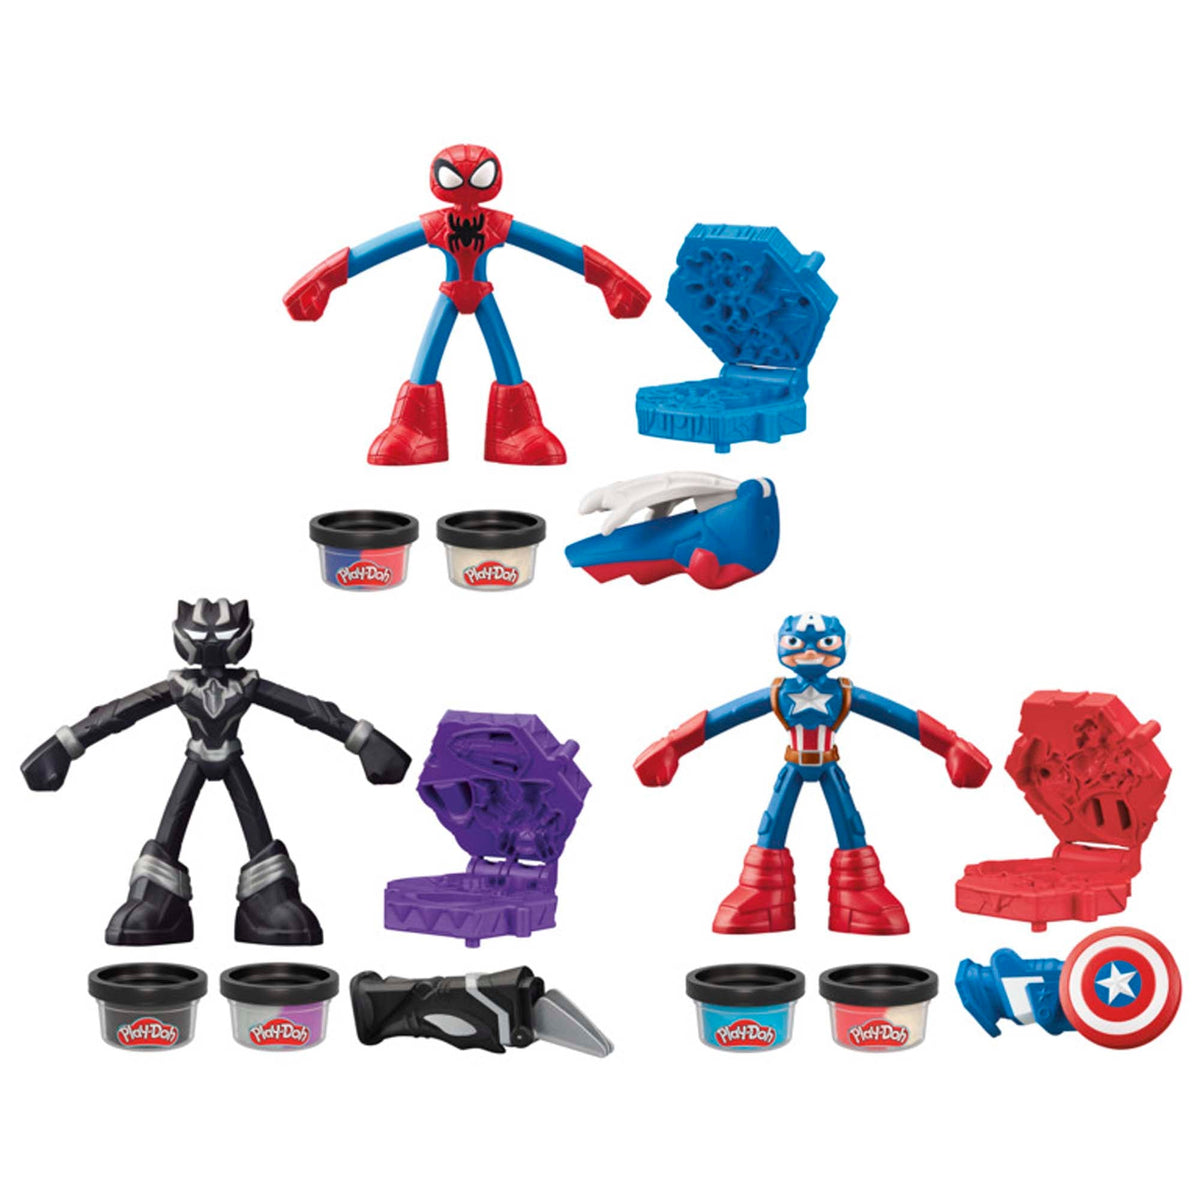 HASBRO Toys & Games Play-Doh Marvel Figure, Assortment, 1 Count